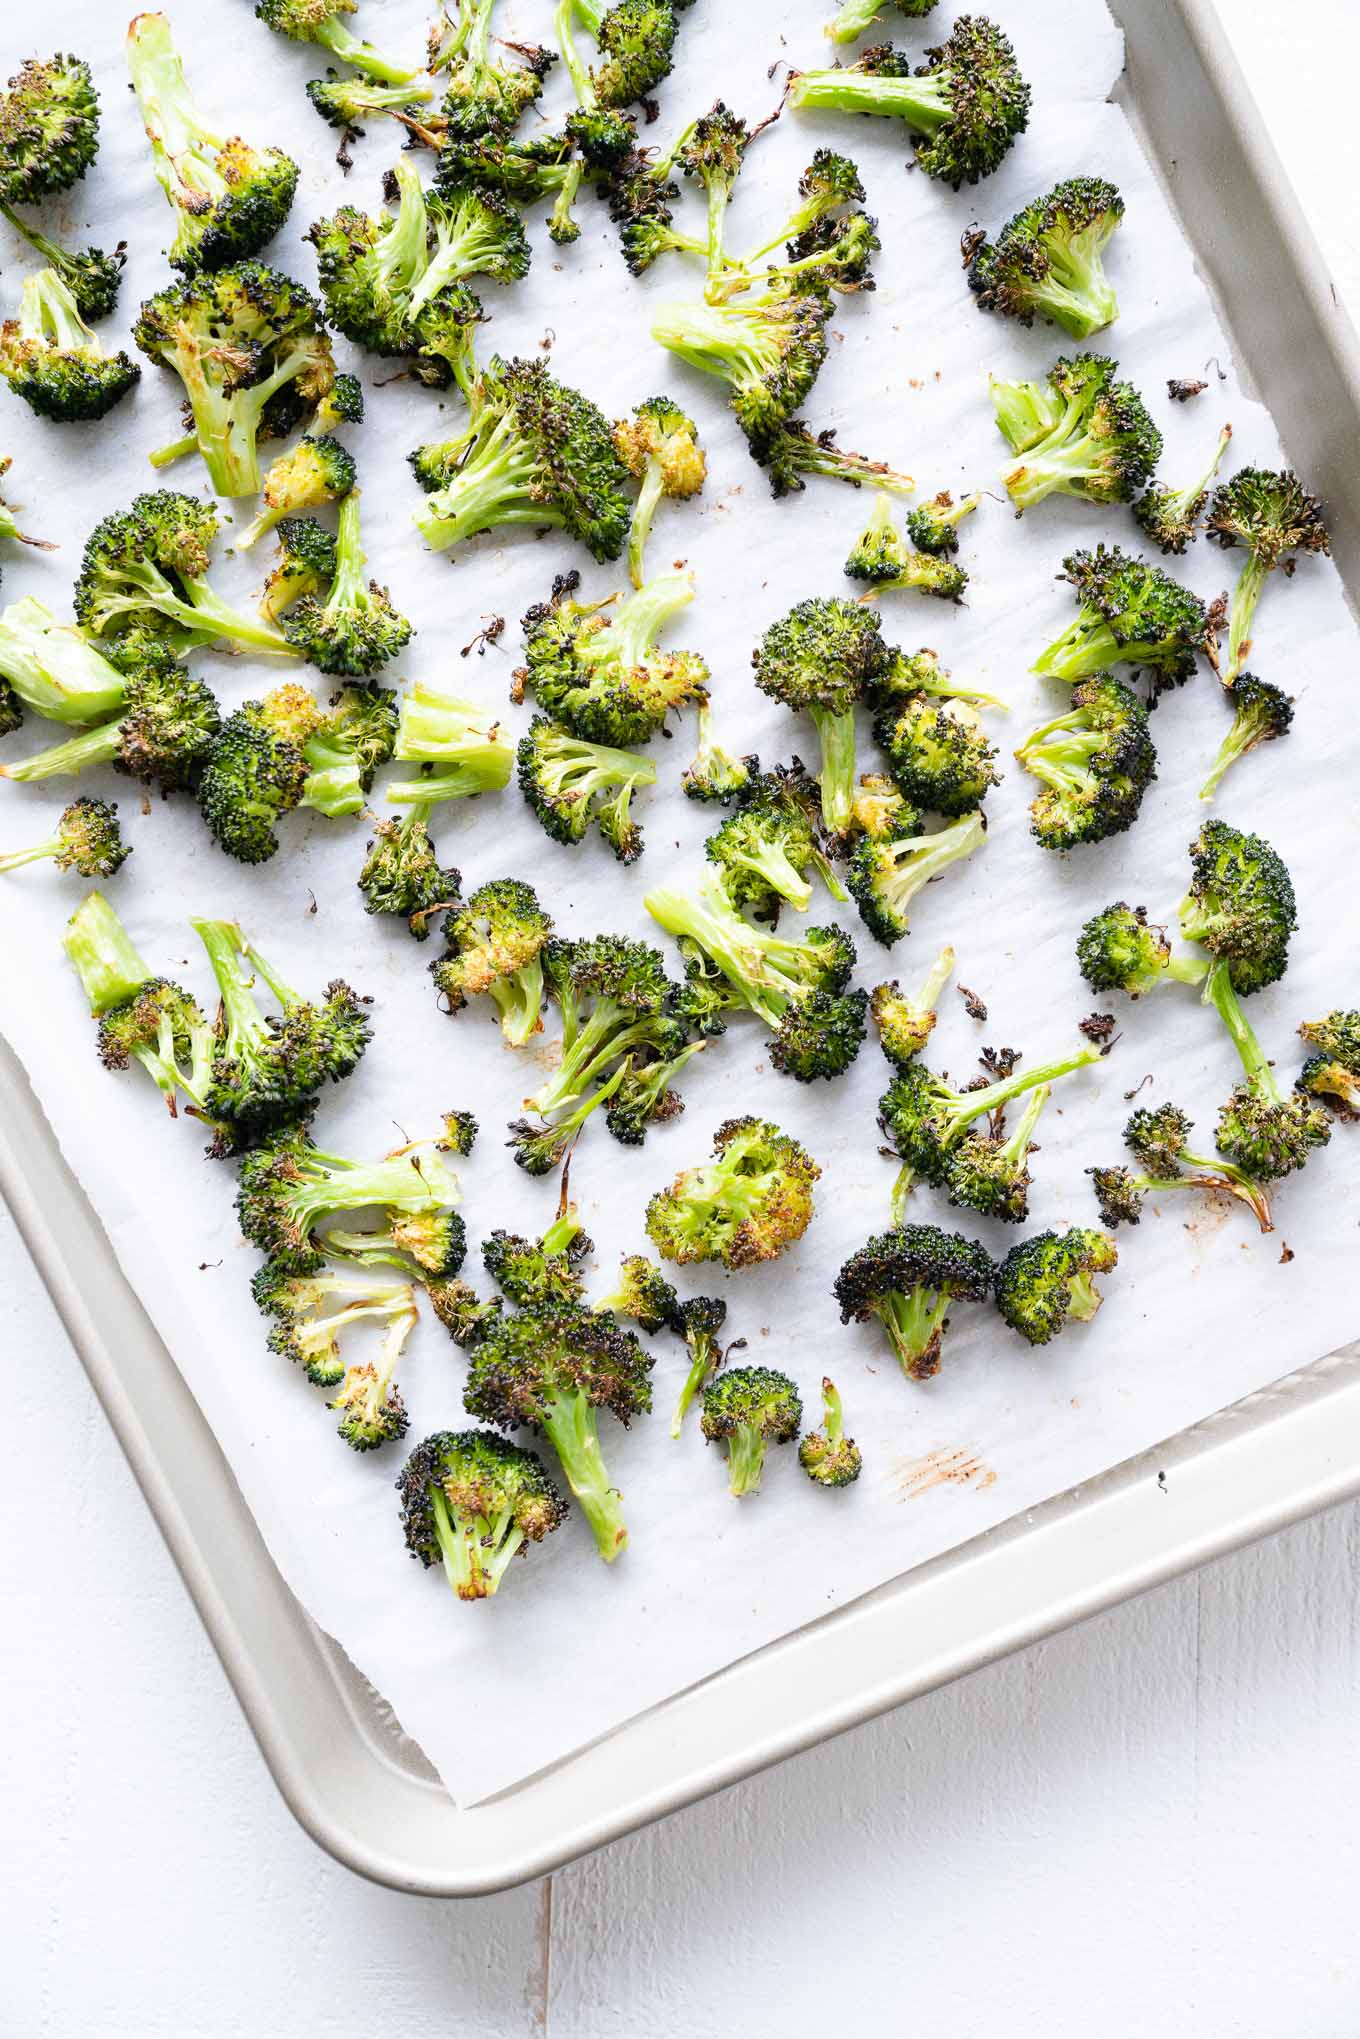 roasted broccoli on sheet tray just out of oven